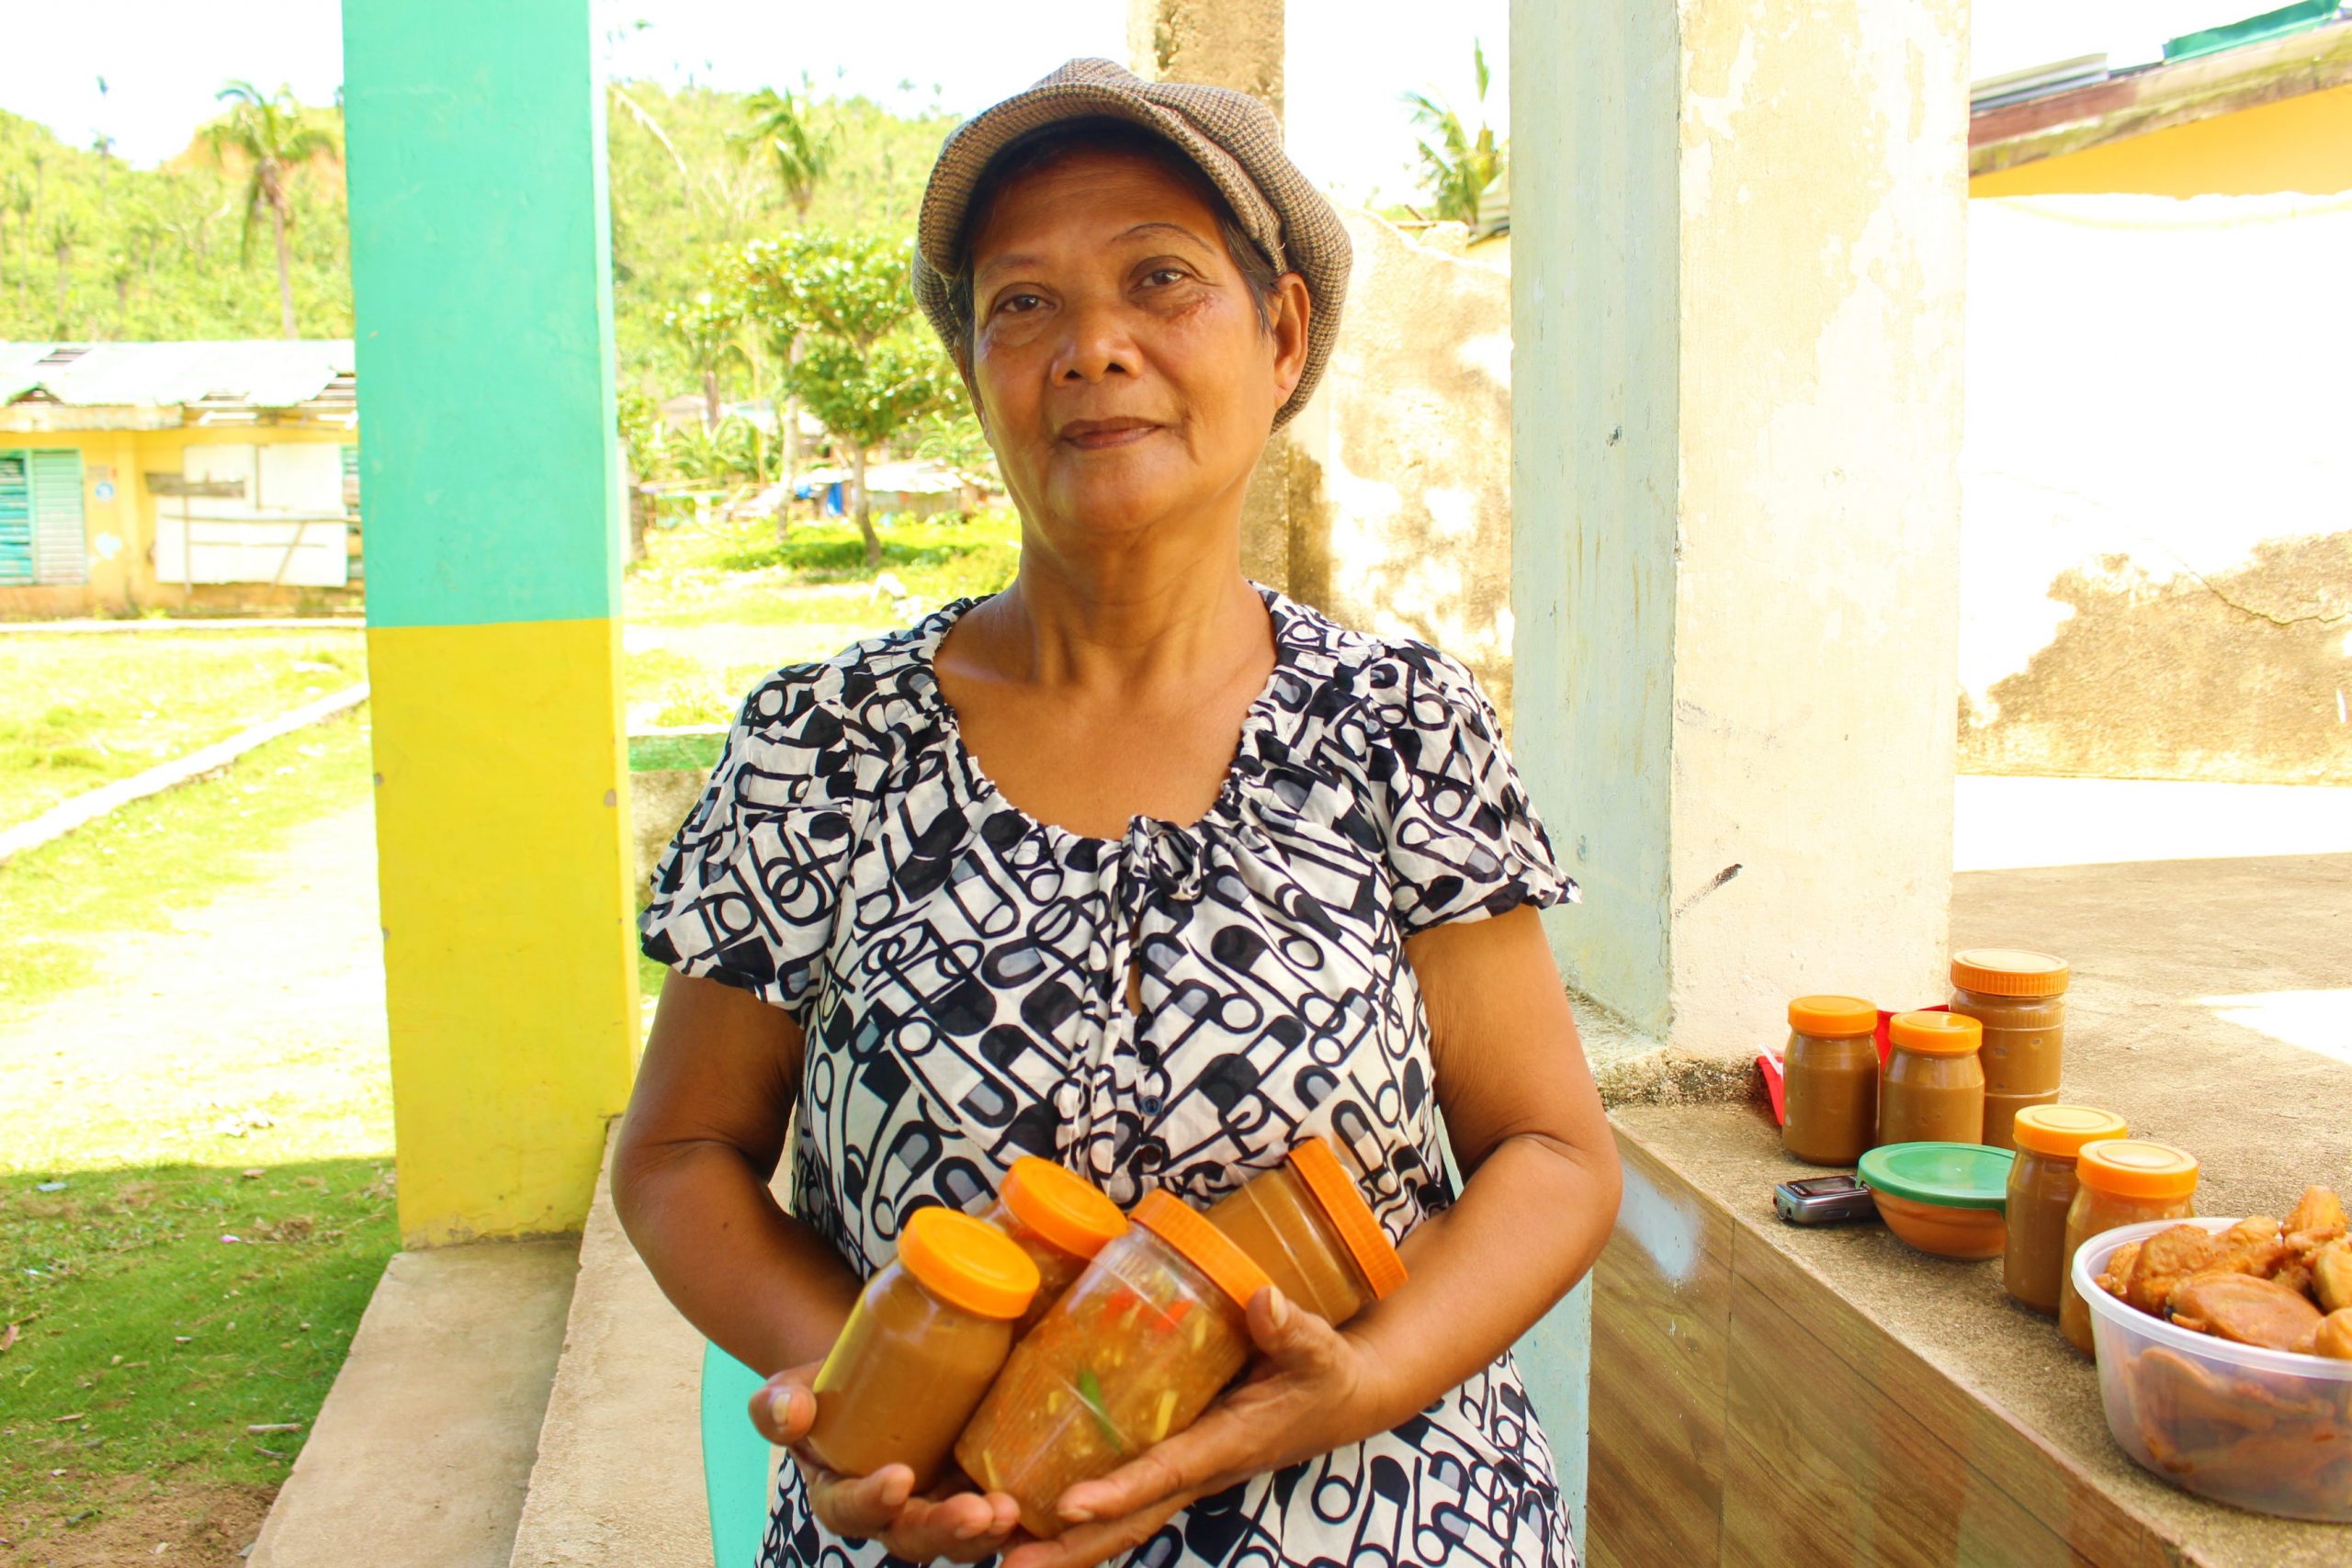 Catanduanes farmers maximize DA-SAAD vegetable project opportunities through food processing